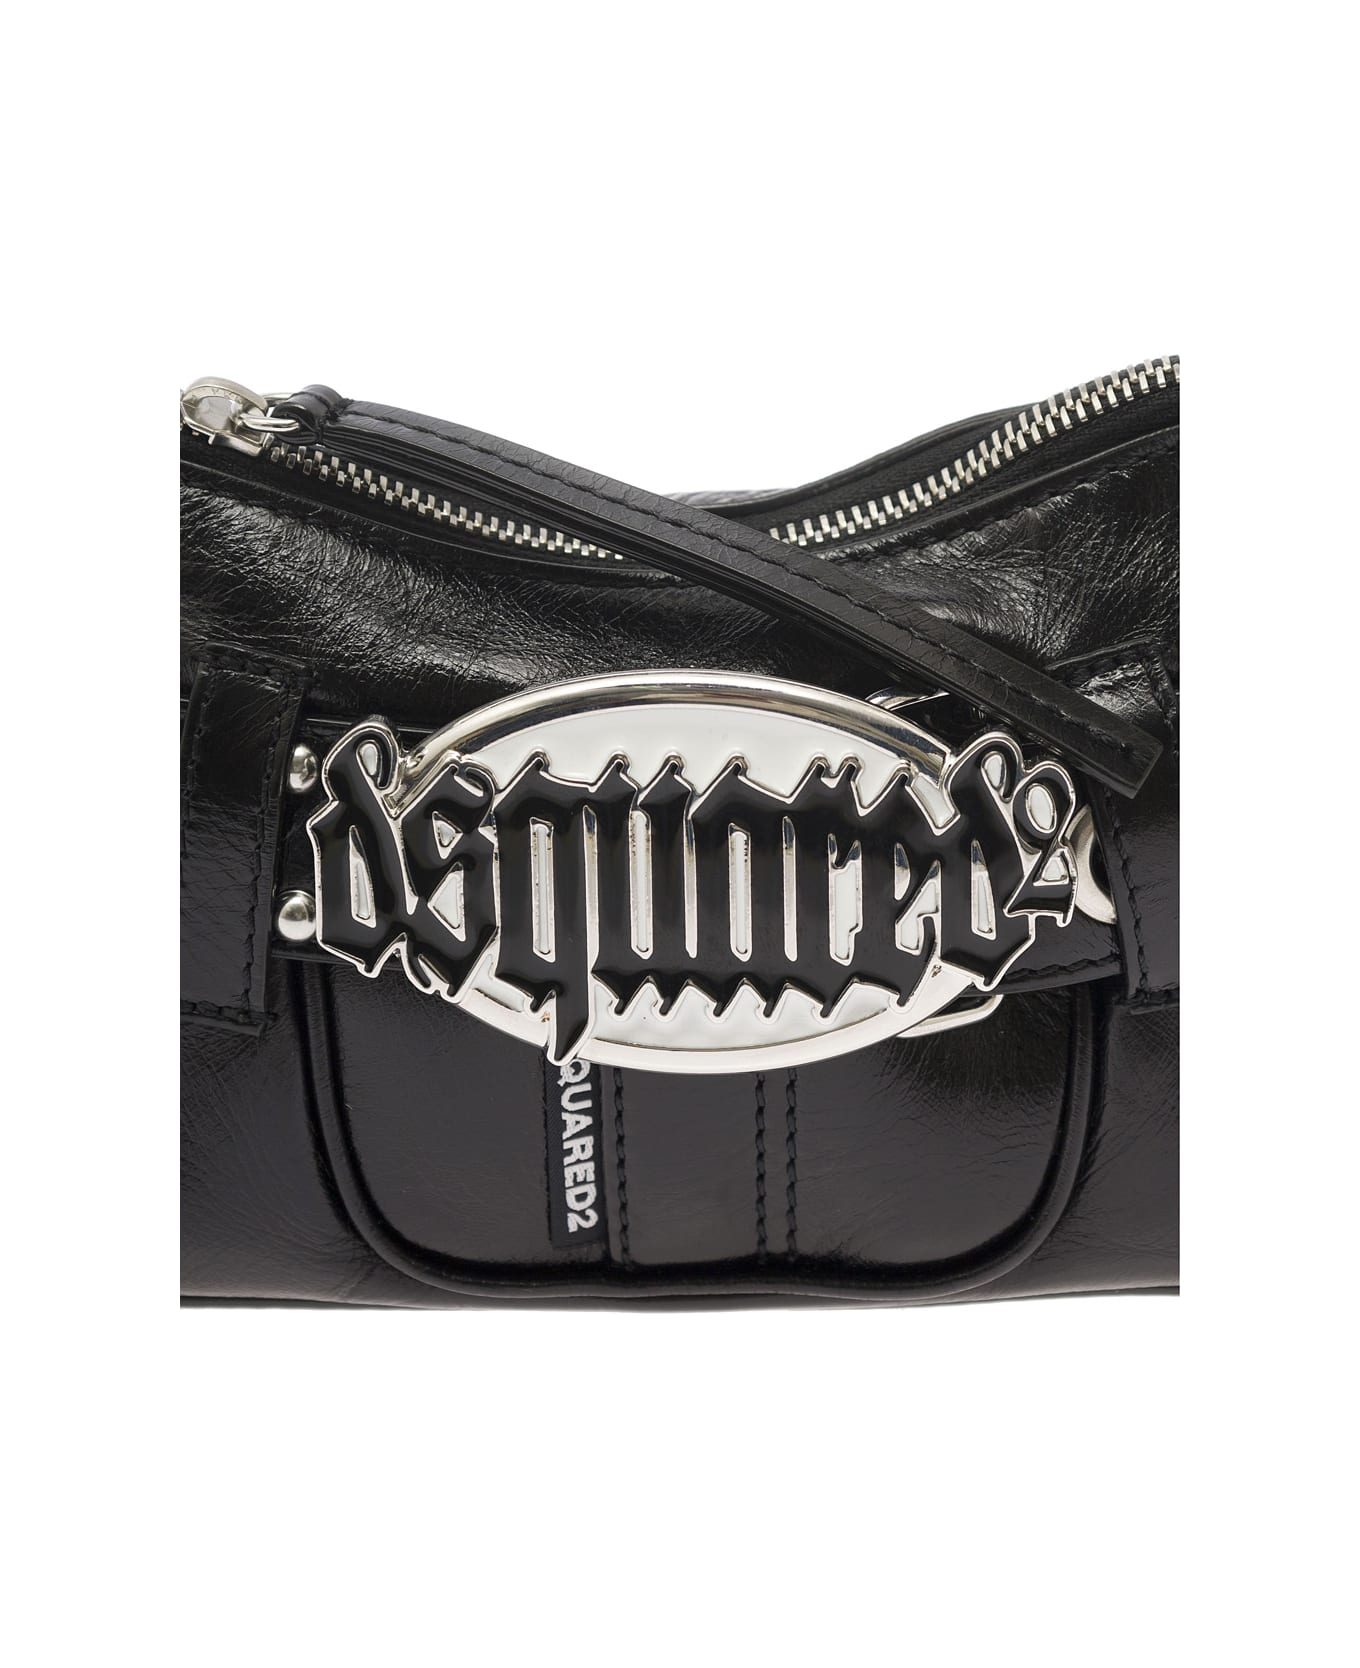 Dsquared2 'gothic' Black Shoulder Bag With Belt Detail In Smooth Leather Woman - Black